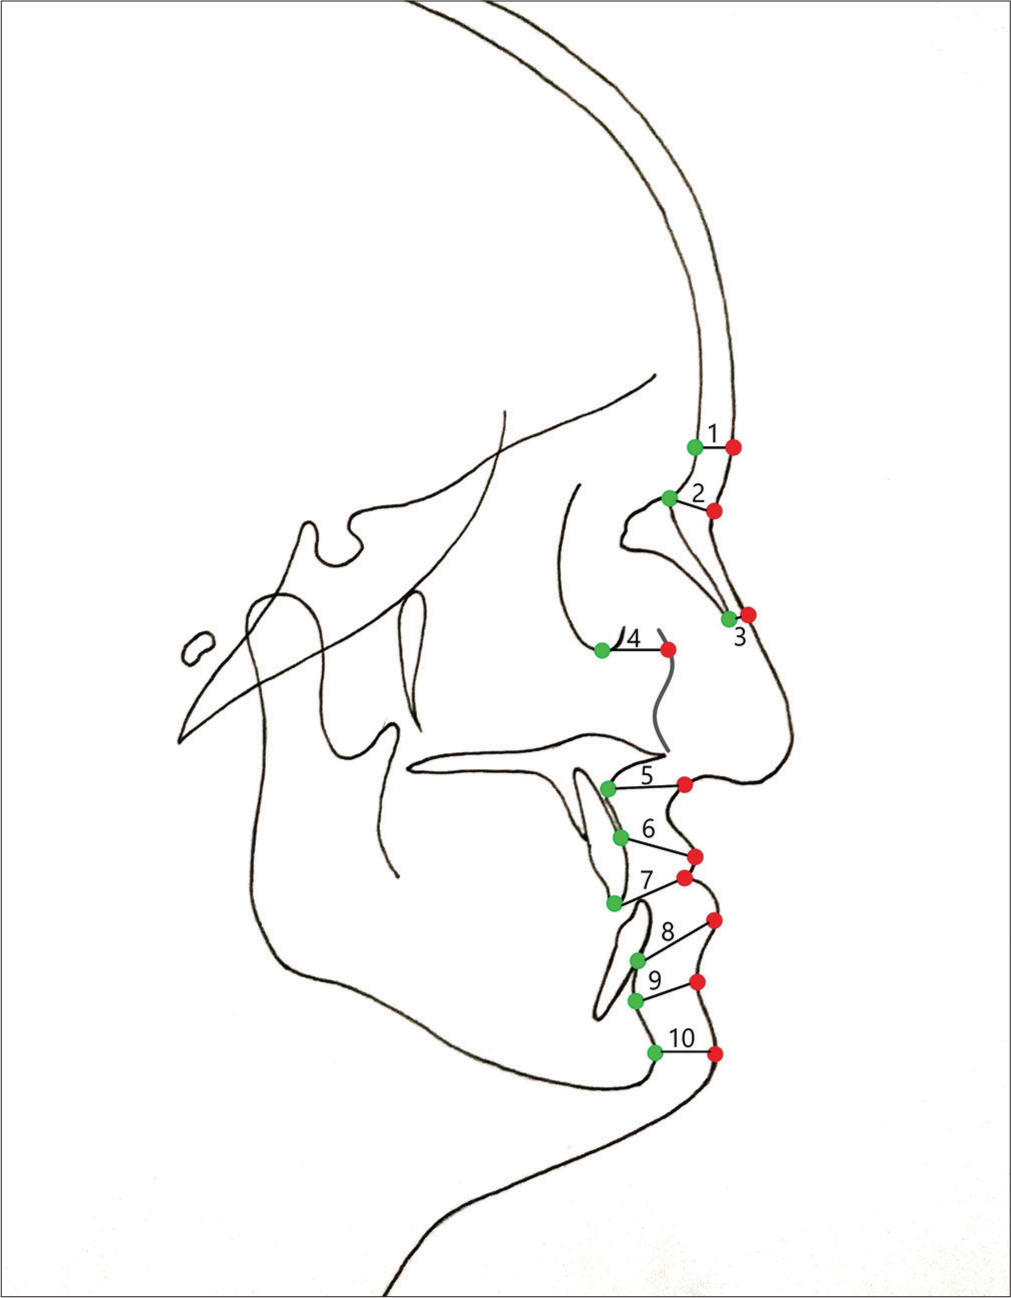 Effect of maxillary distraction osteogenesis and LeFort-1 advancement orthognathic surgery on soft-tissue thickness and anterior soft-tissue to hard-tissue movement ratios among patients with complete unilateral cleft lip and palate